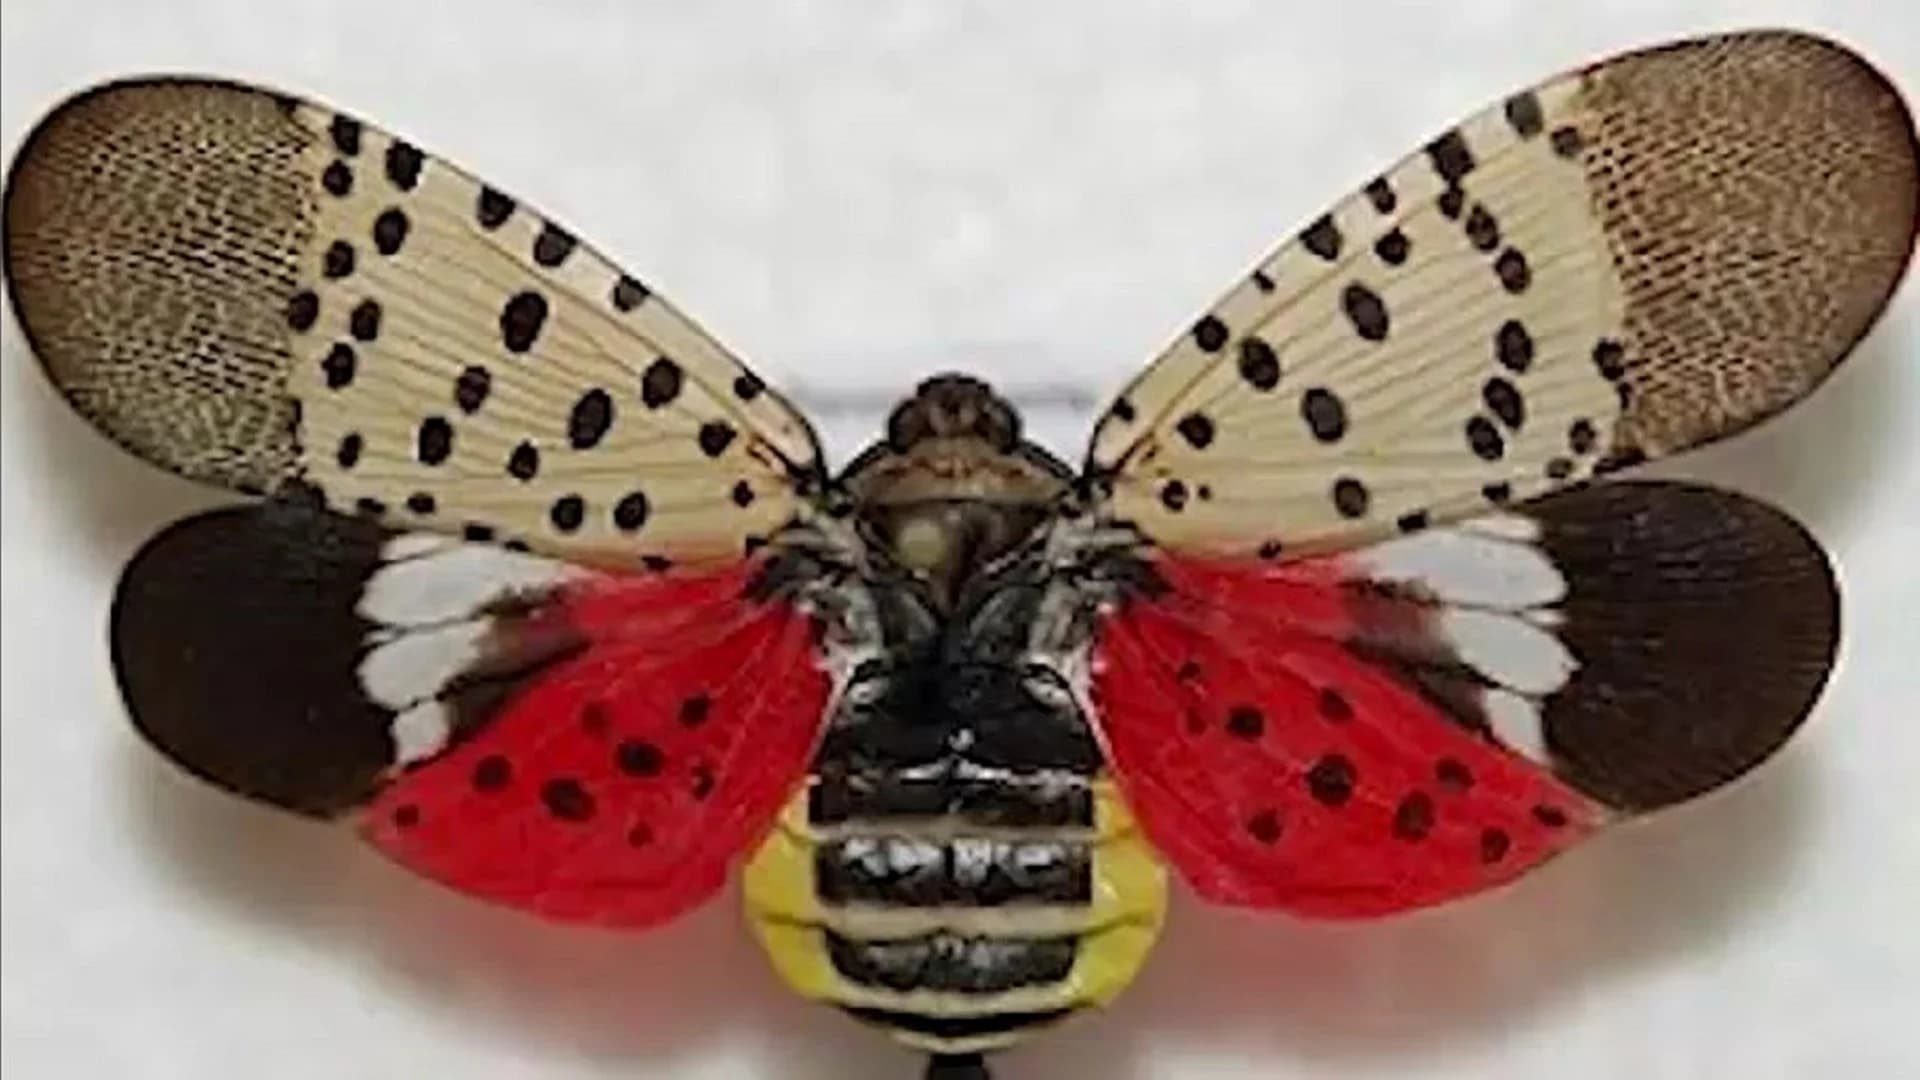 New Jersey adds 5 more counties to spotted lanternfly quarantine zone